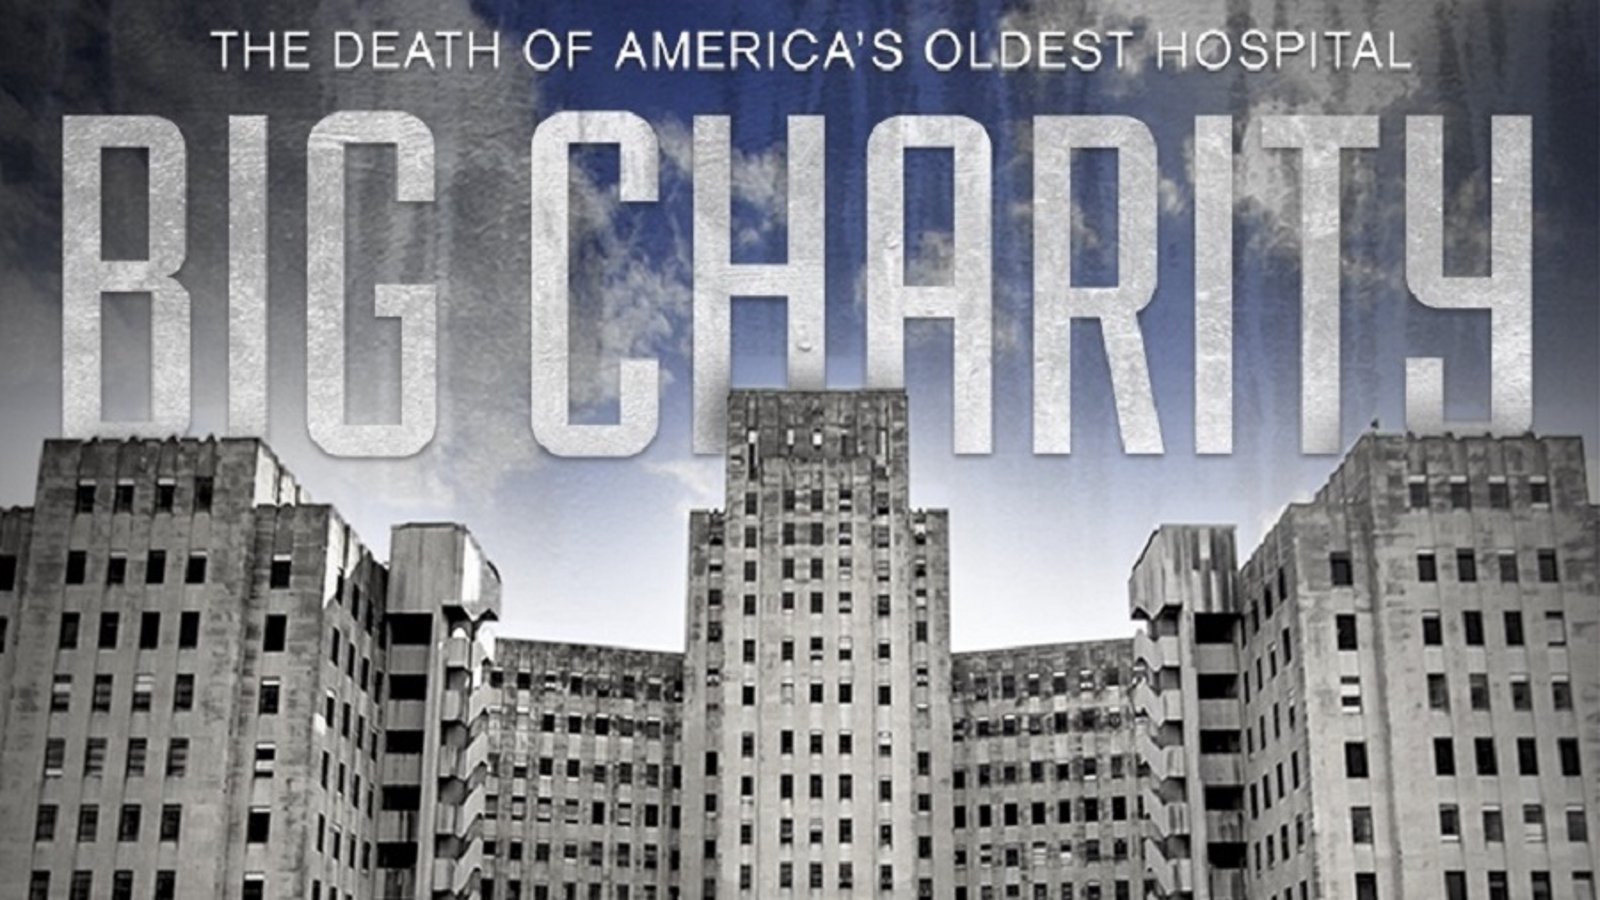 Big Charity - The Death of America's Oldest Hospital